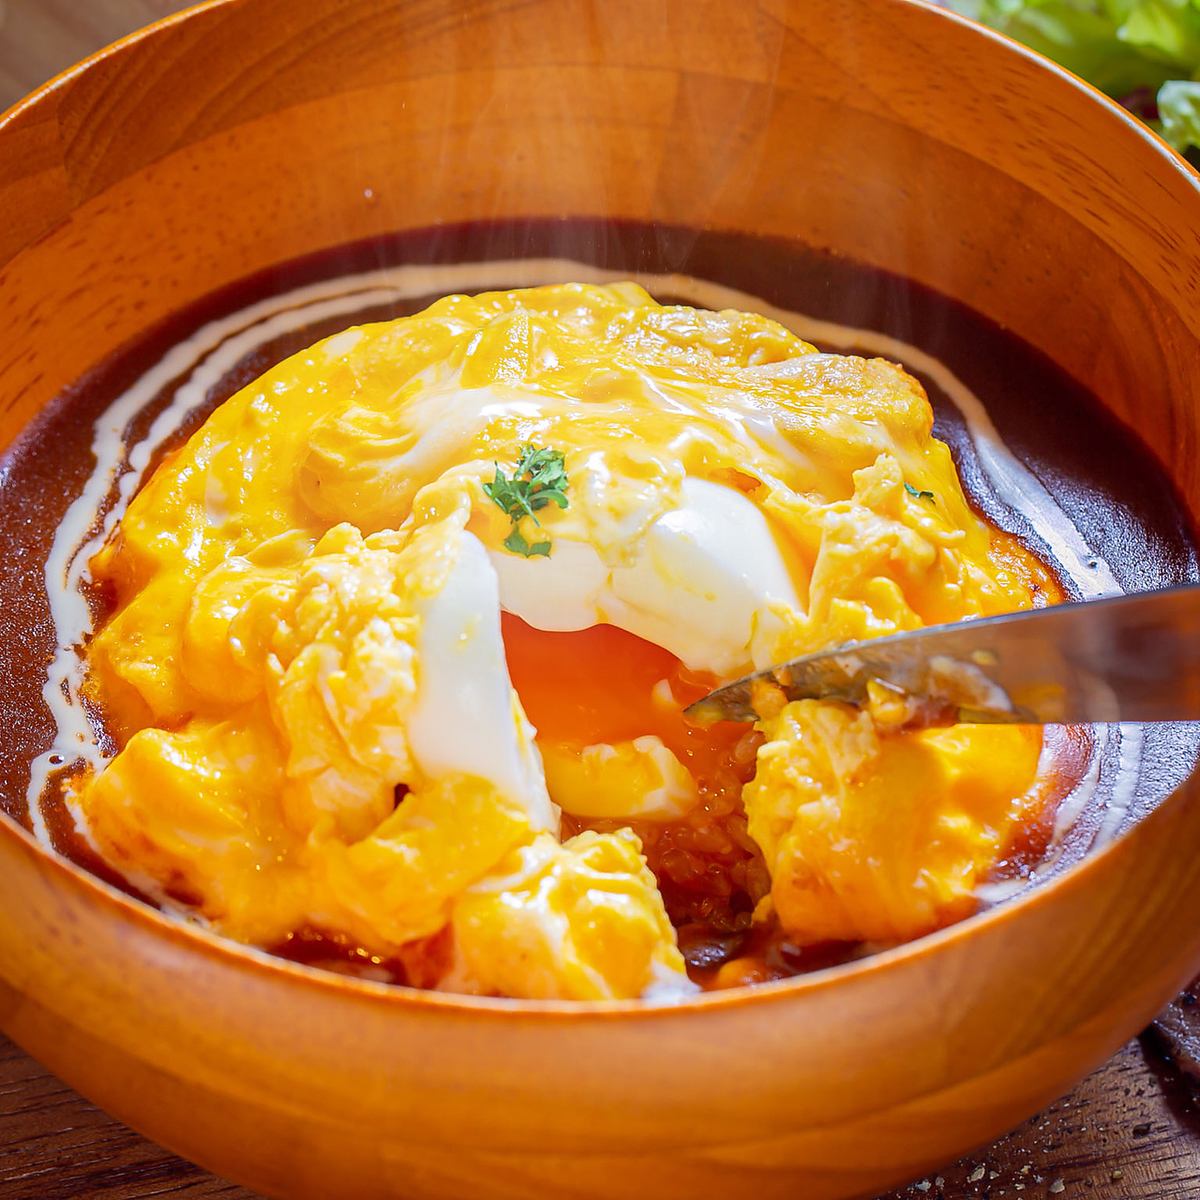 Hot and exquisite omelet rice with fluffy eggs ♪